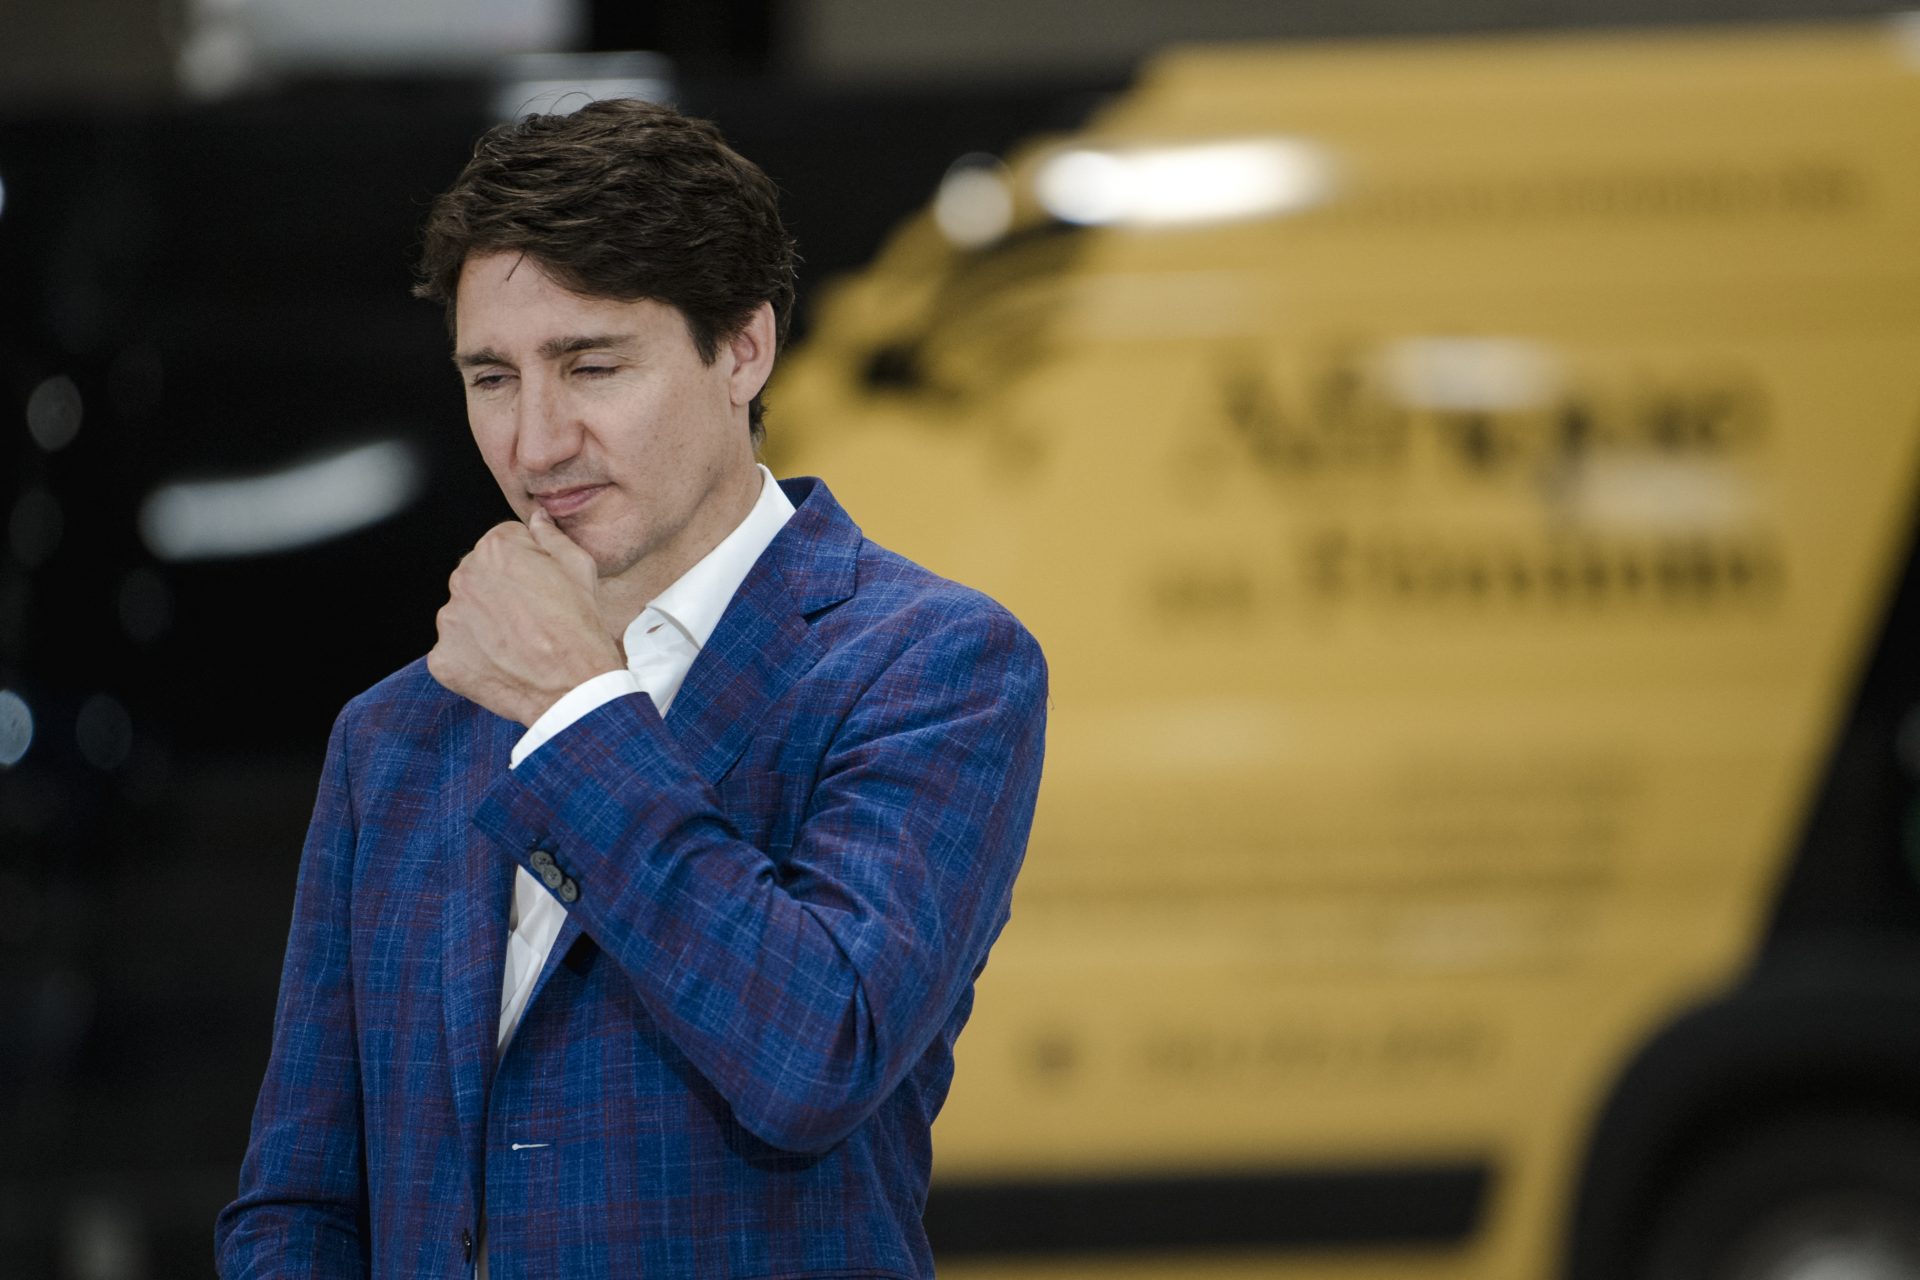 Negative impressions of Trudeau have remained consistent